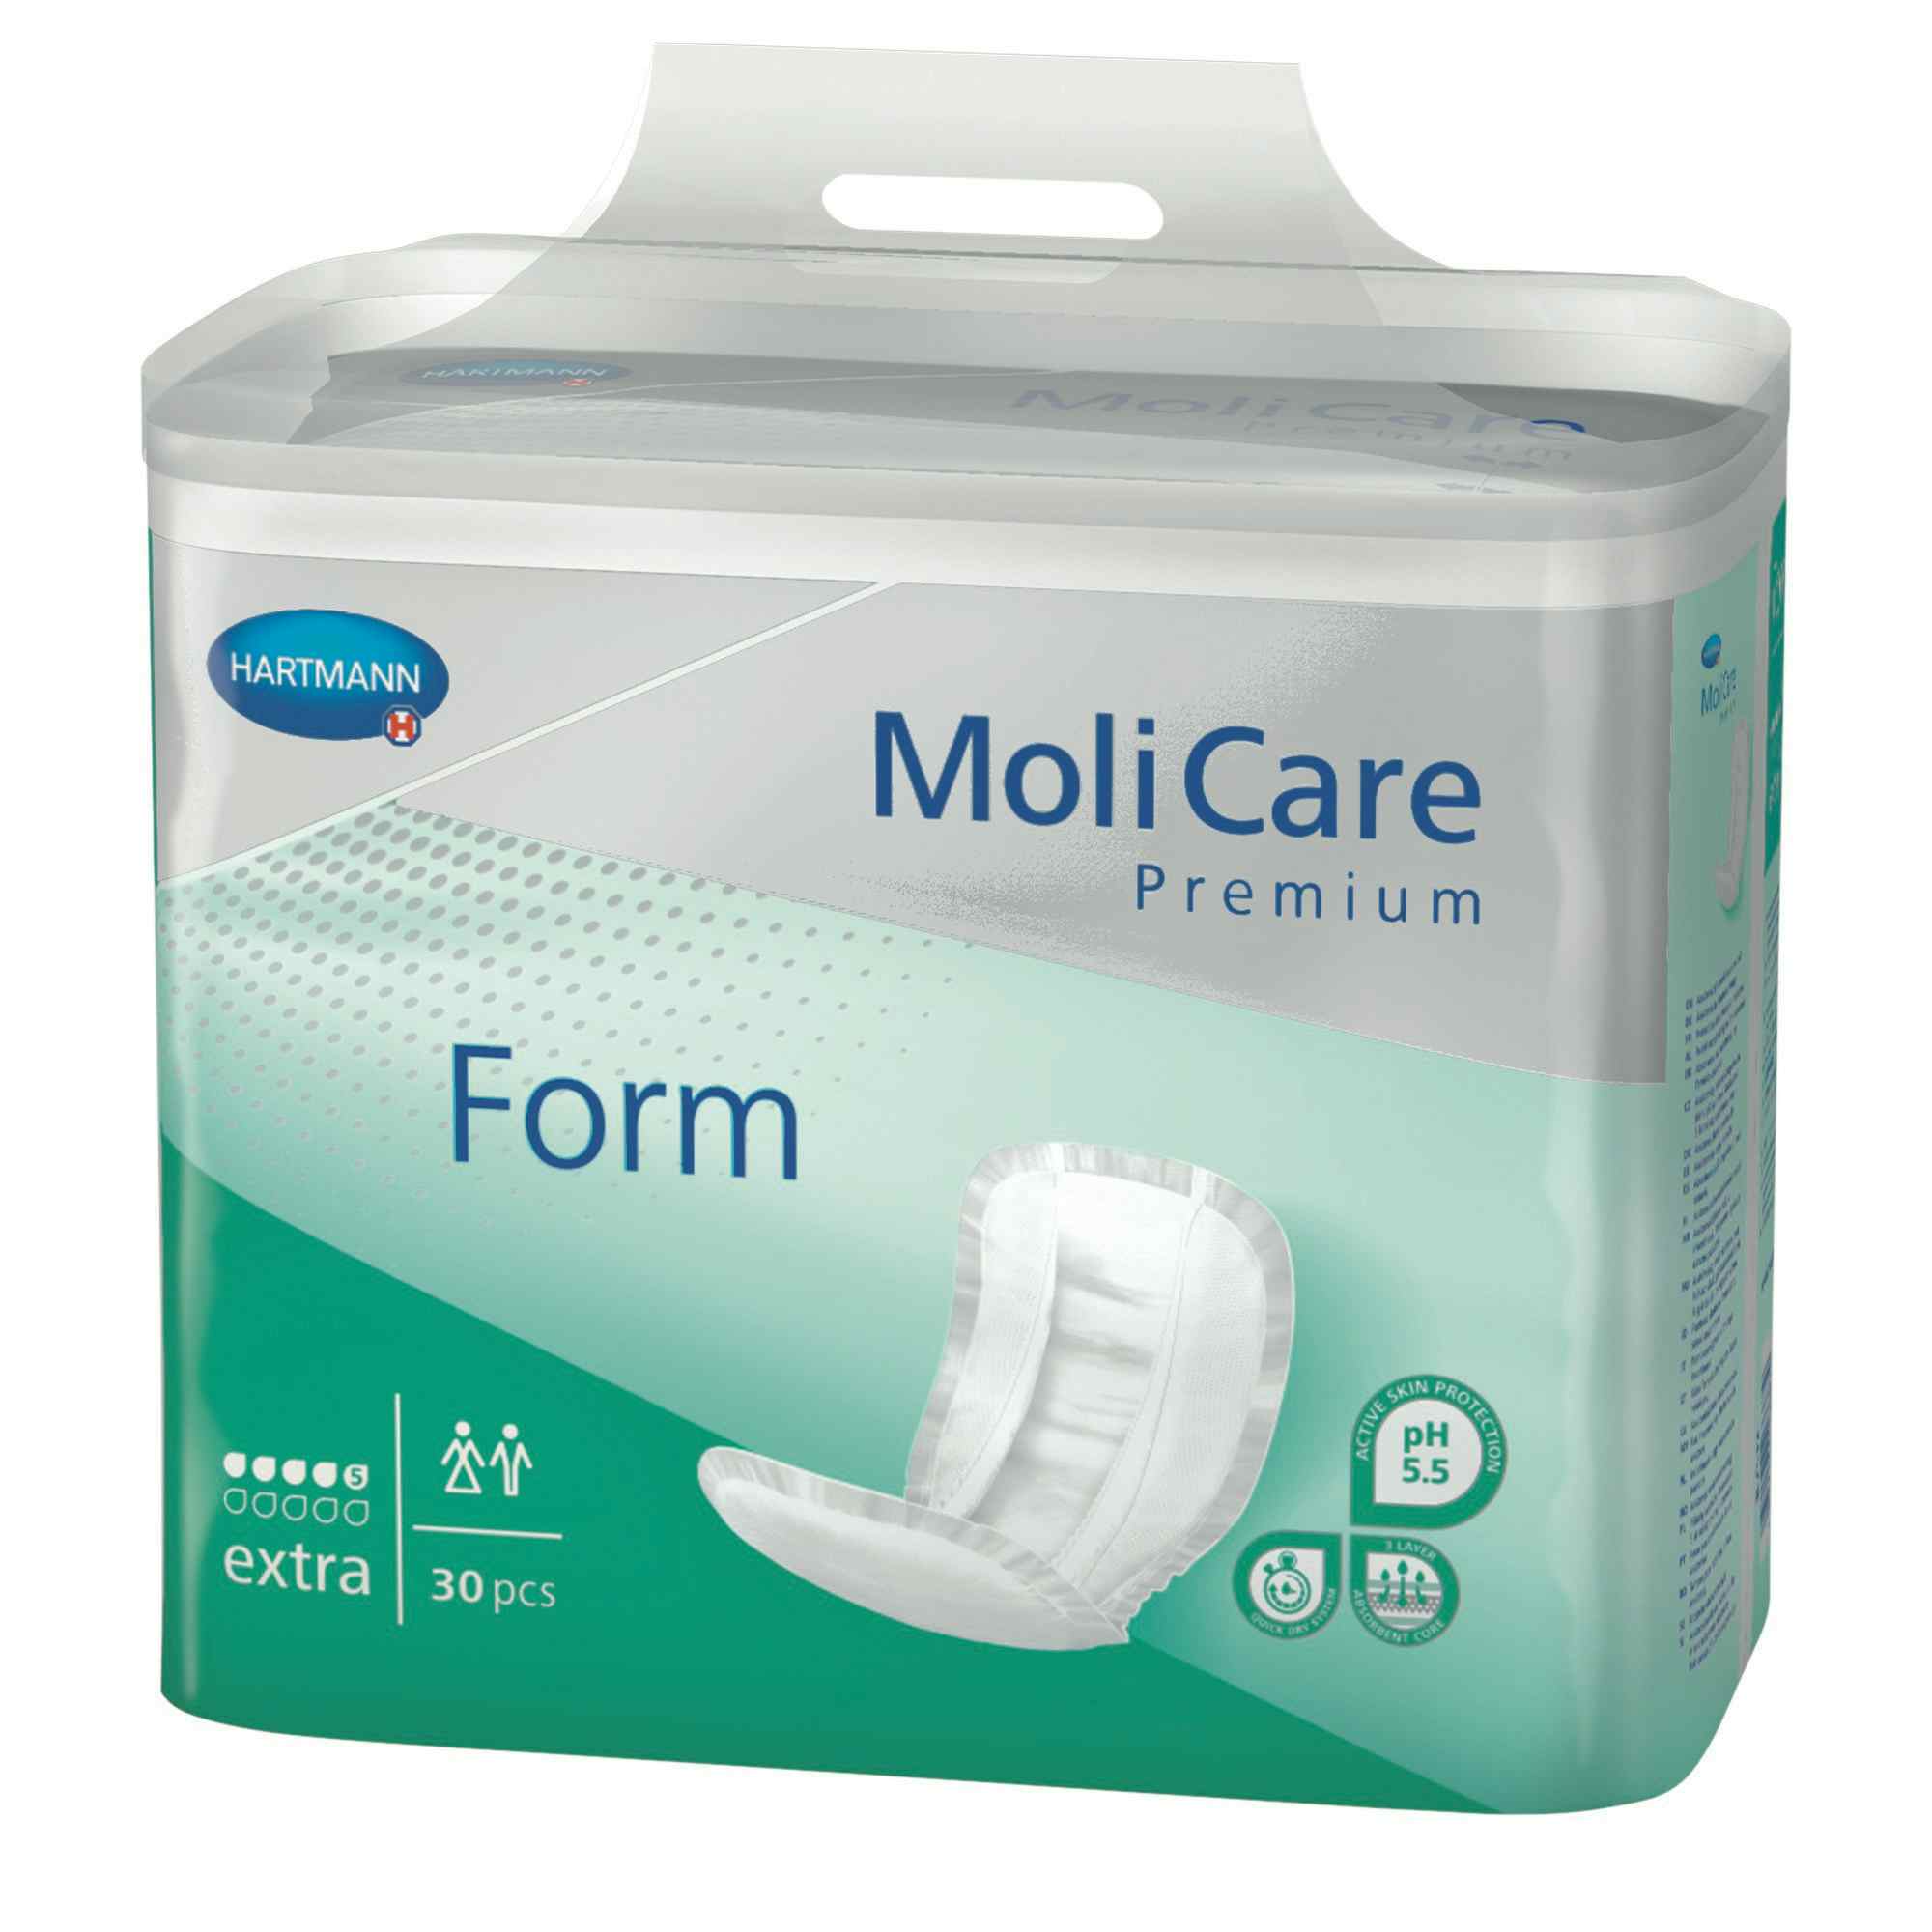 MoliCare Premium Form Bladder Control Pad, Moderate Absorbency , 168219, Bag of 30